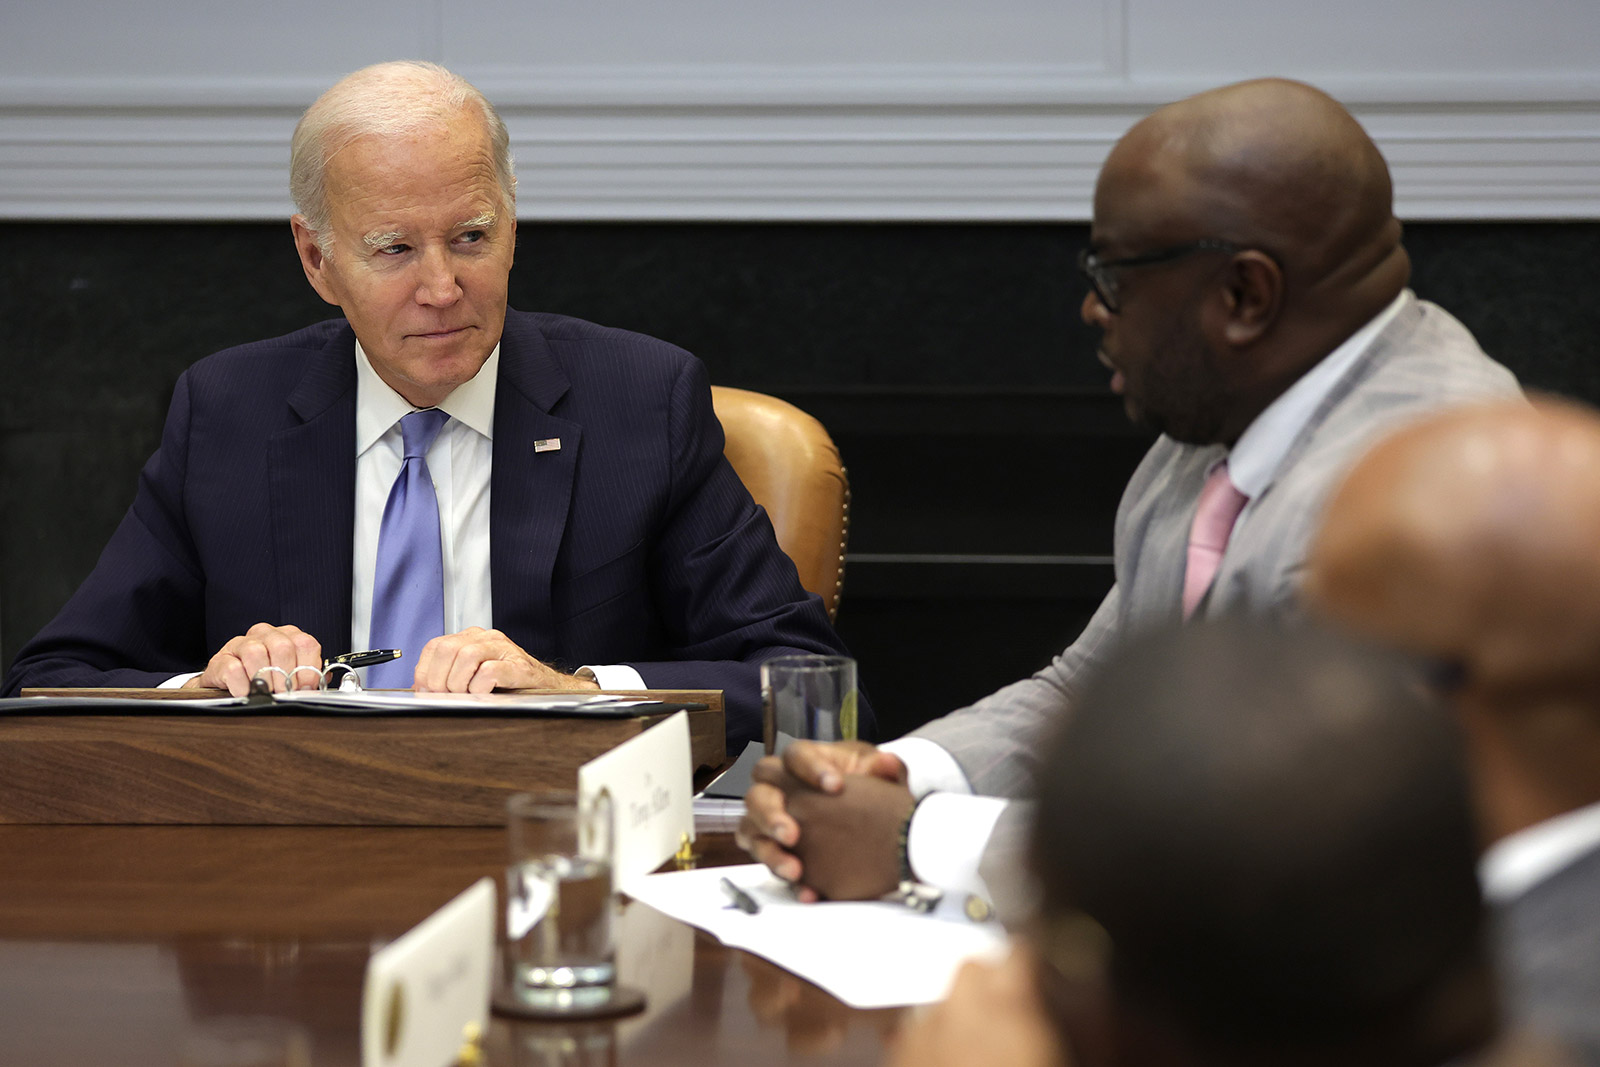 Tony Allen, right, Chair of the President’s Board of Advisors on HBCUs and President of Delaware State University, speaks as US President Joe Biden listens during a meeting with members of the President’s Board of Advisors on Historically Black Colleges and Universities at the Roosevelt Room of the White House on September 25, 2023.